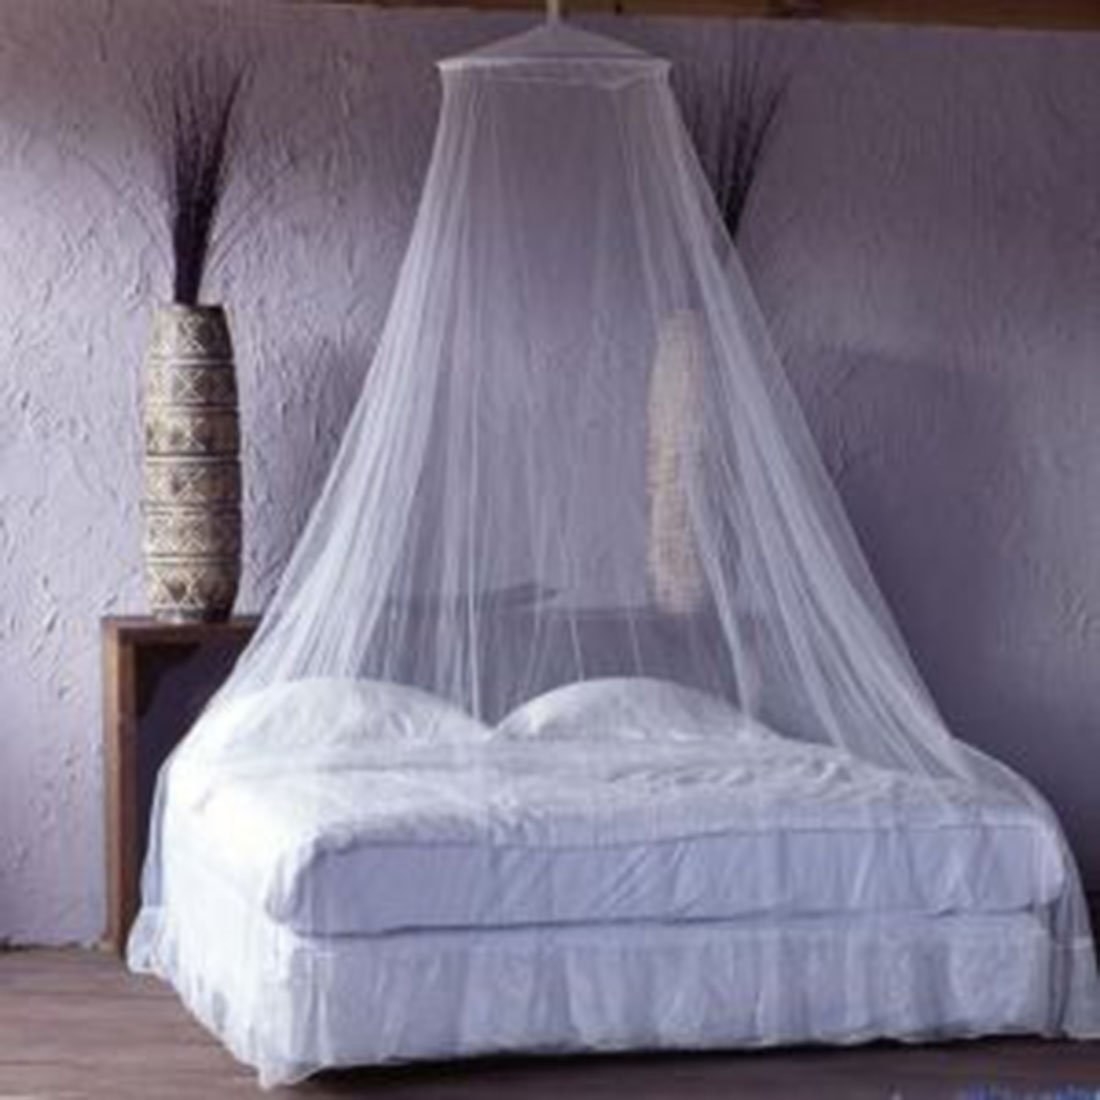 A canopy on a white bed.